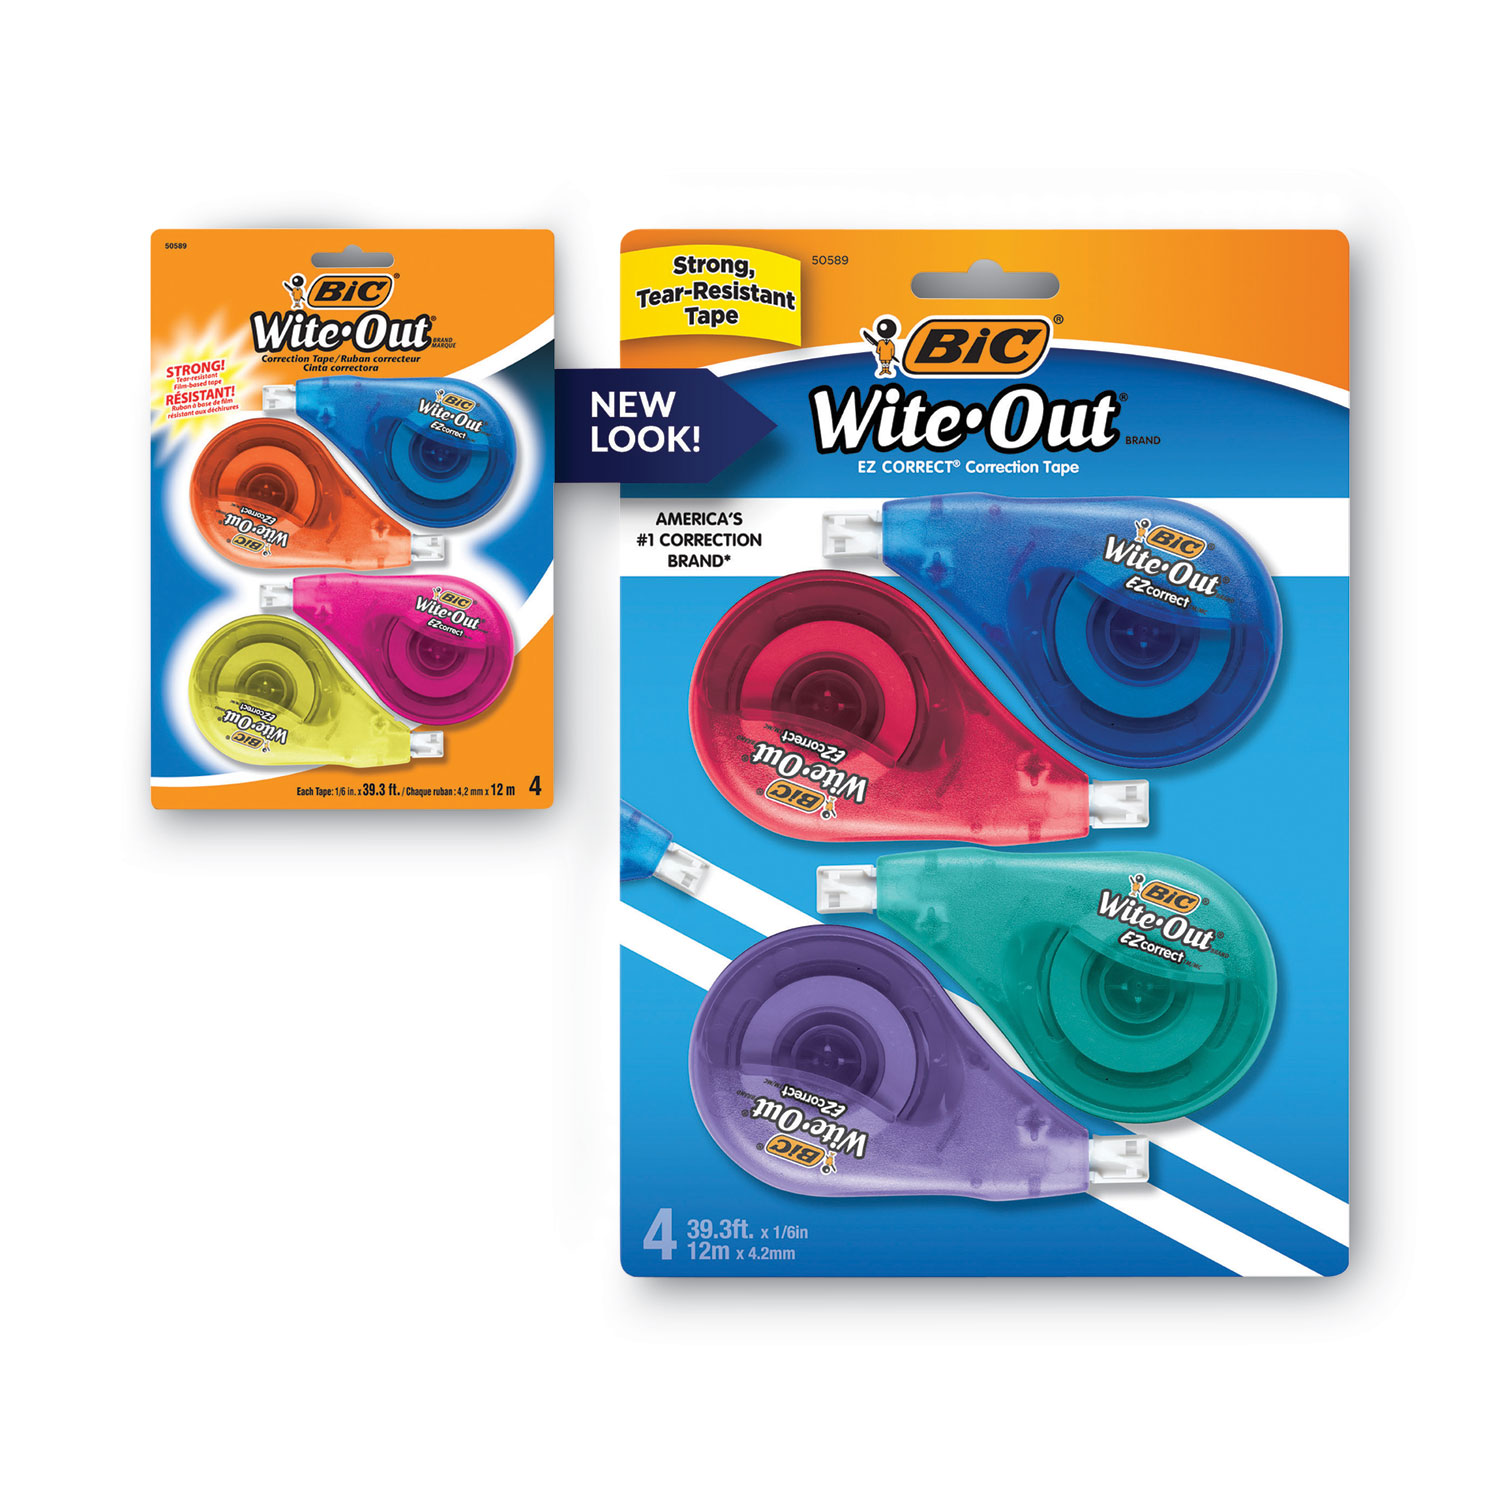 Wite-Out EZ Correct Correction Tape, Non-Refillable, 1/6 x 472, 18/Pack, Bic